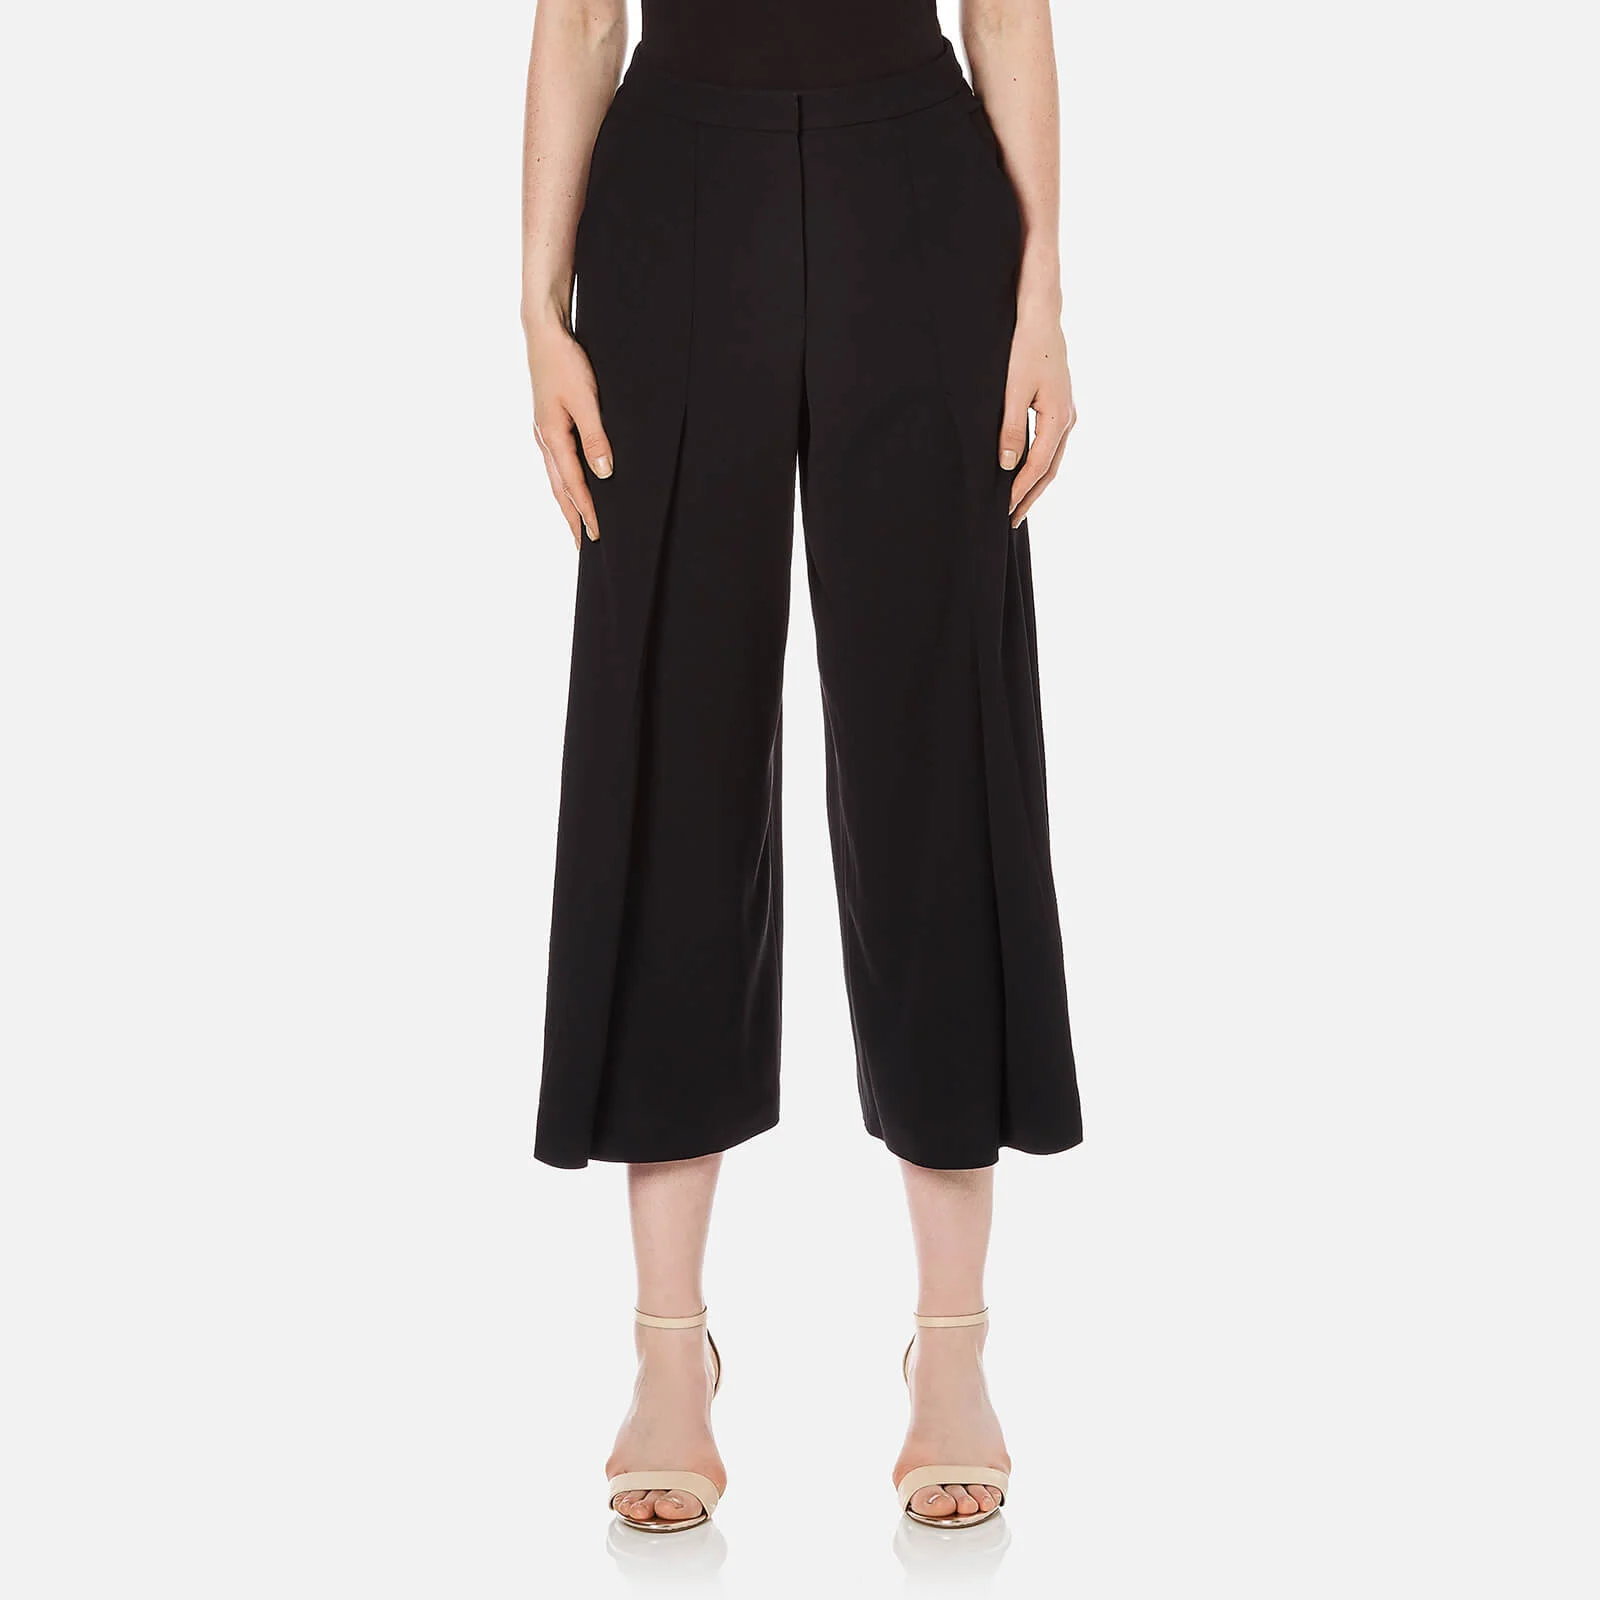 T by Alexander Wang Women's Poly Crepe Flared Pants - Black Image 1